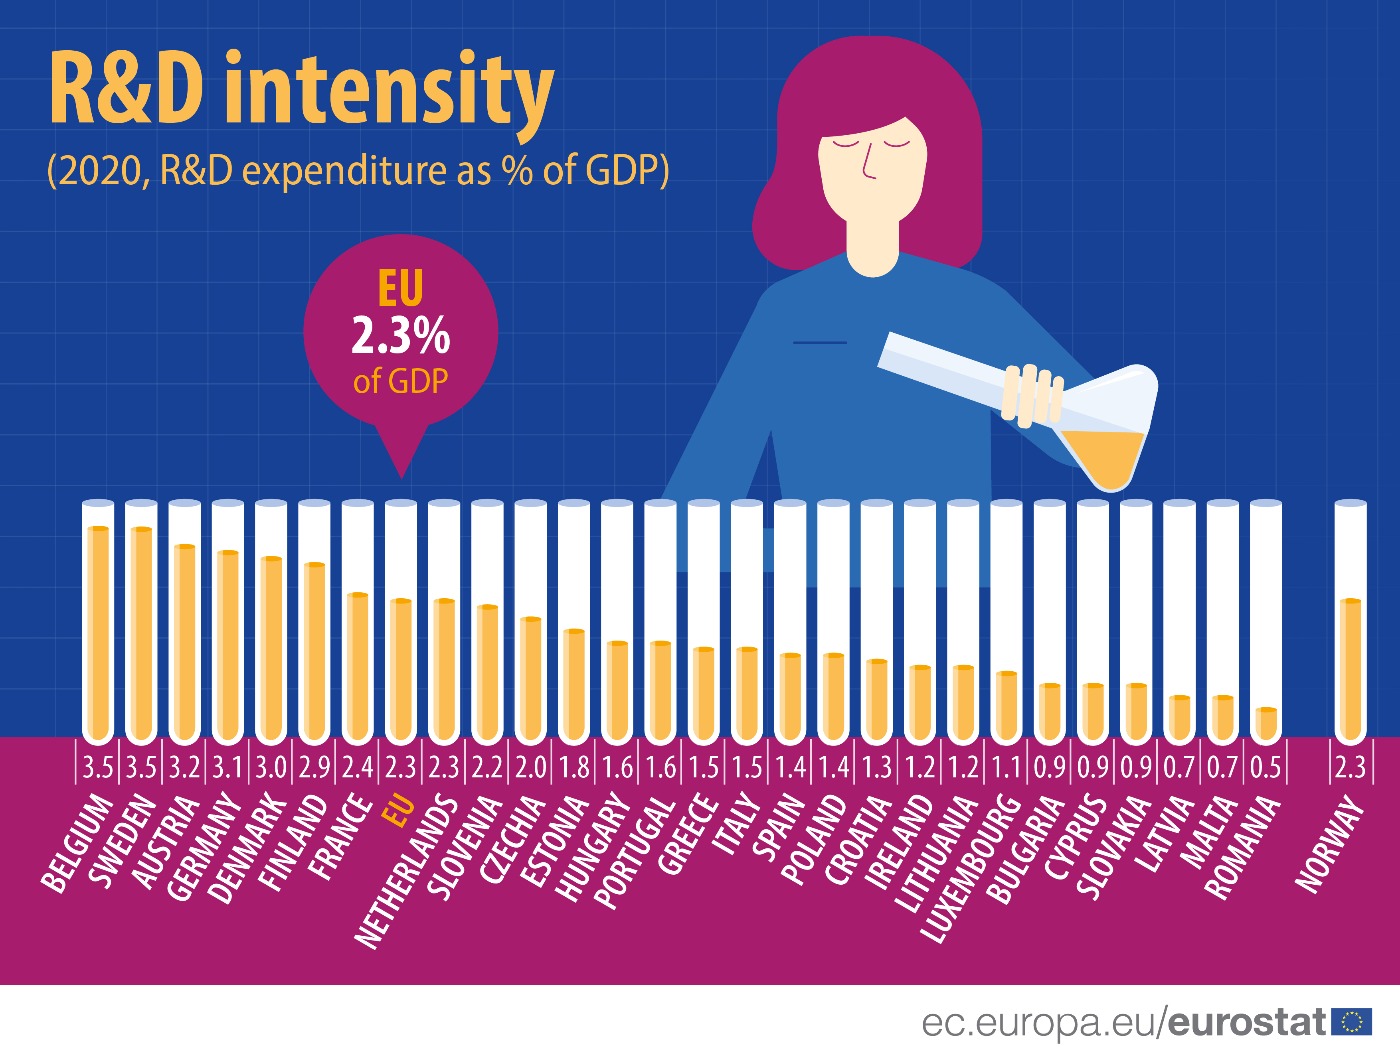 Bar graph: R&D intensity in 2020, which is R&D expenditure as a % of GDP, in the EU and EFTA countries